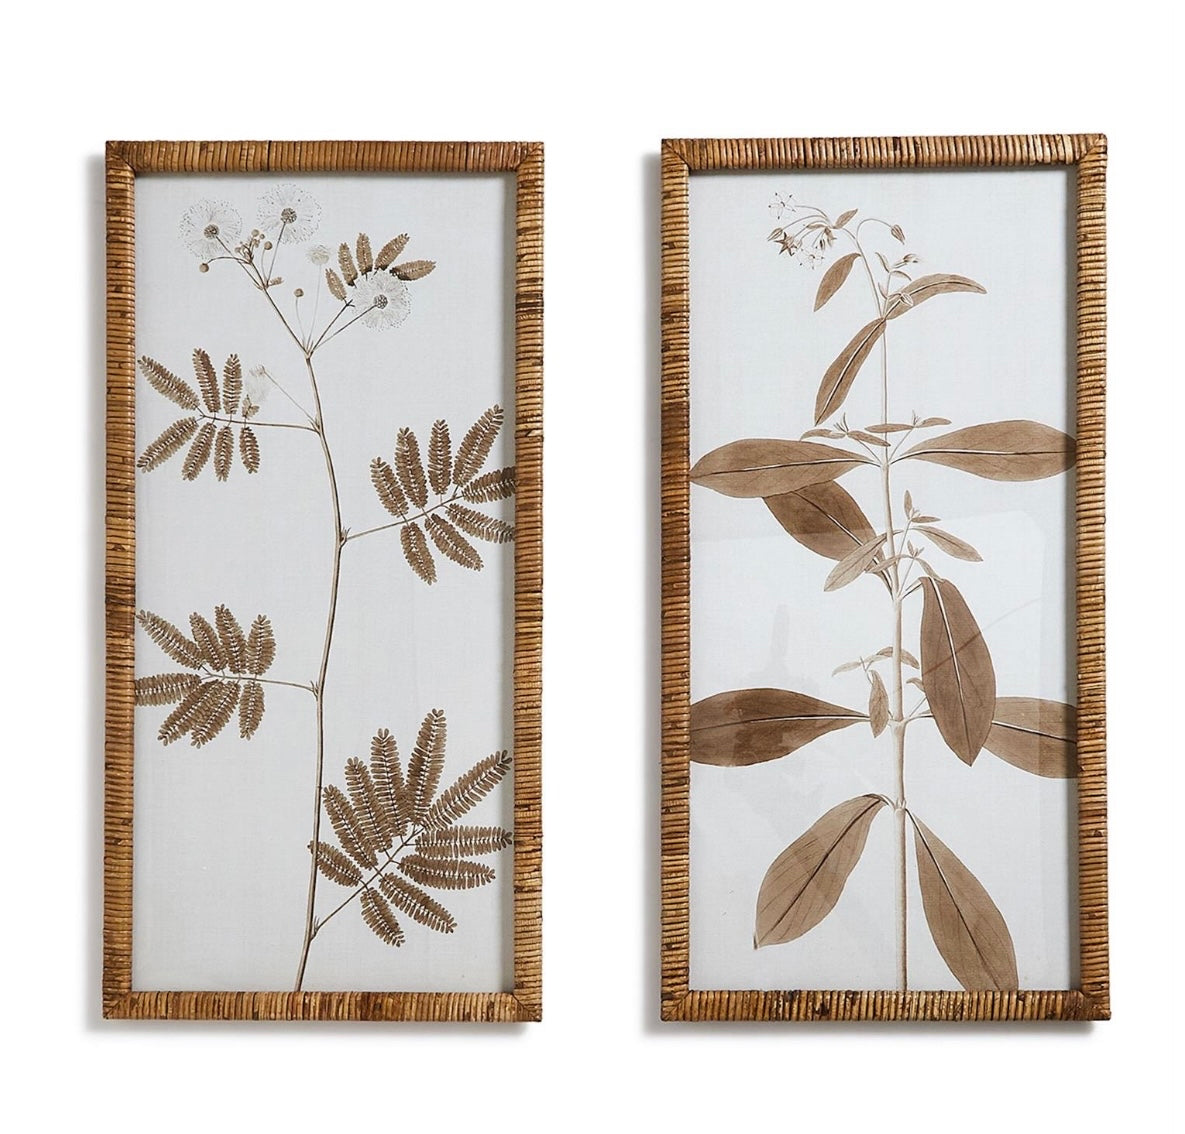 Mimosa & Star Flower Floral Prints, set of 2